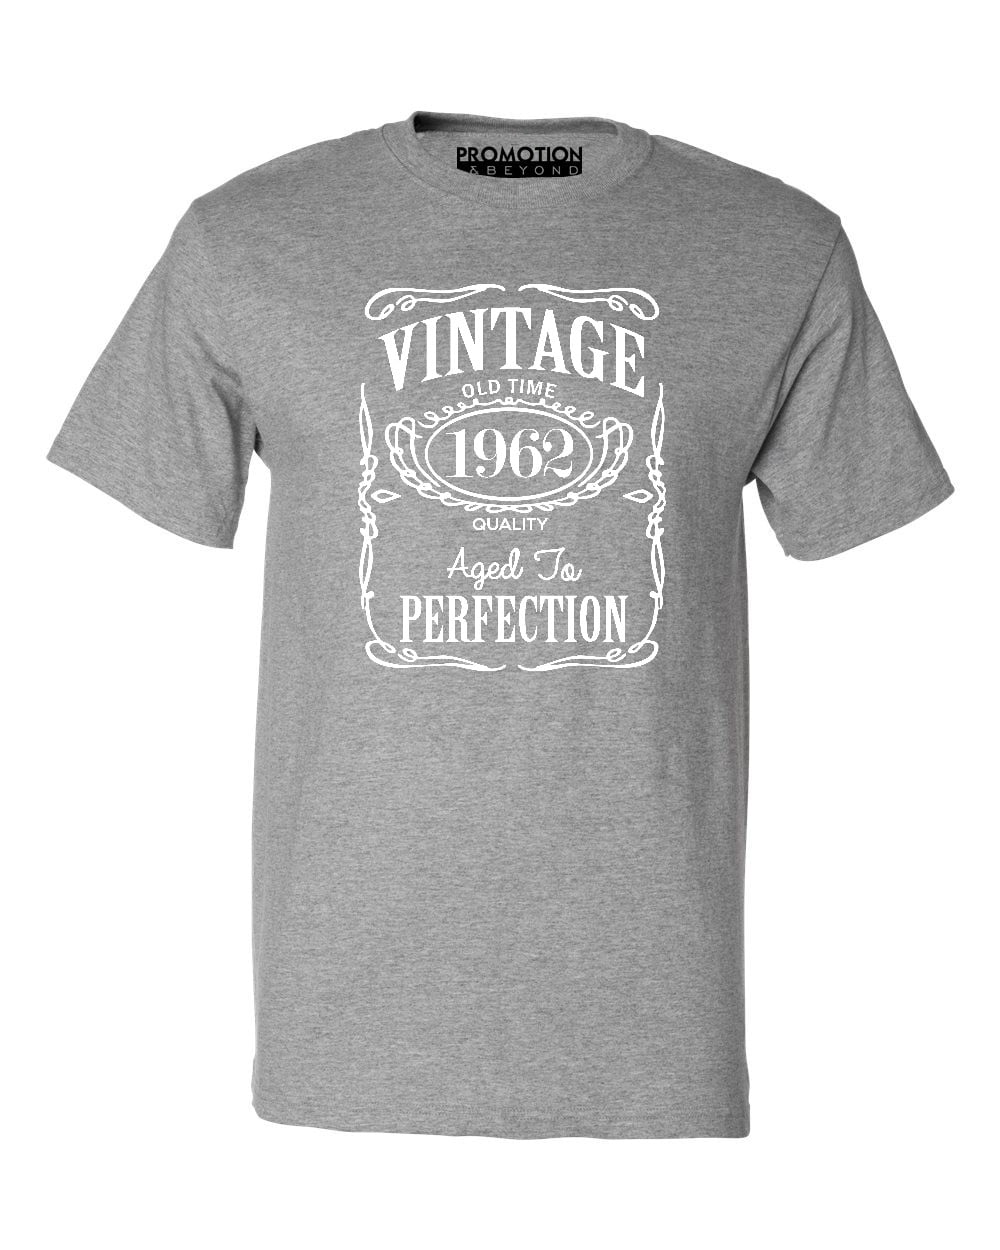 60th Birthday Shirts for Men Vintage 1962 Aged to Perfection Racing 60th Birthday Gift 